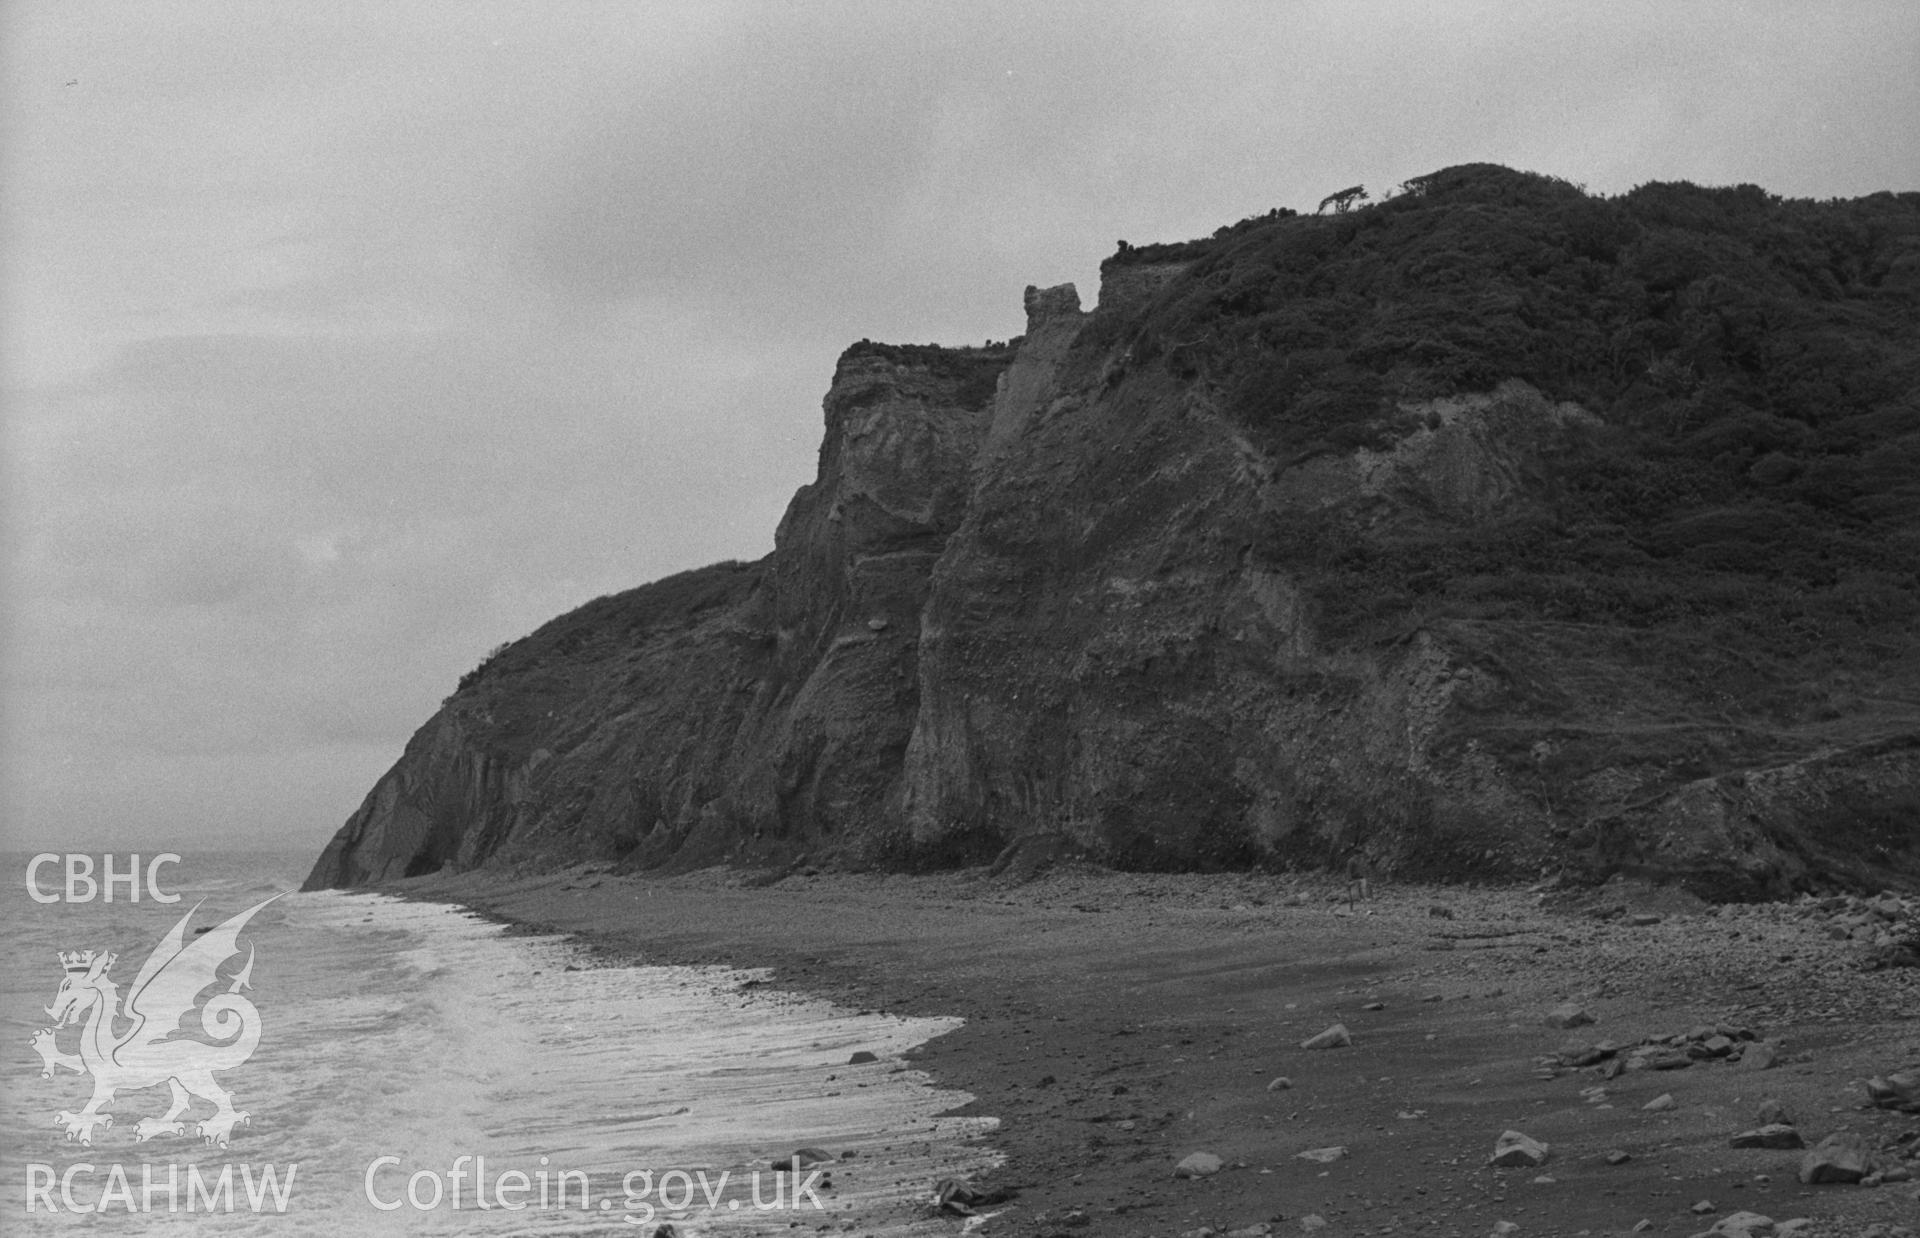 Black and White photograph showing view of the boulder clay cliffs from the mouth of the Afon Gwinton, Gilfach yr Halen beach. Photographed by Arthur Chater in August 1962 from Grid Reference SN 435 614, looking north east.